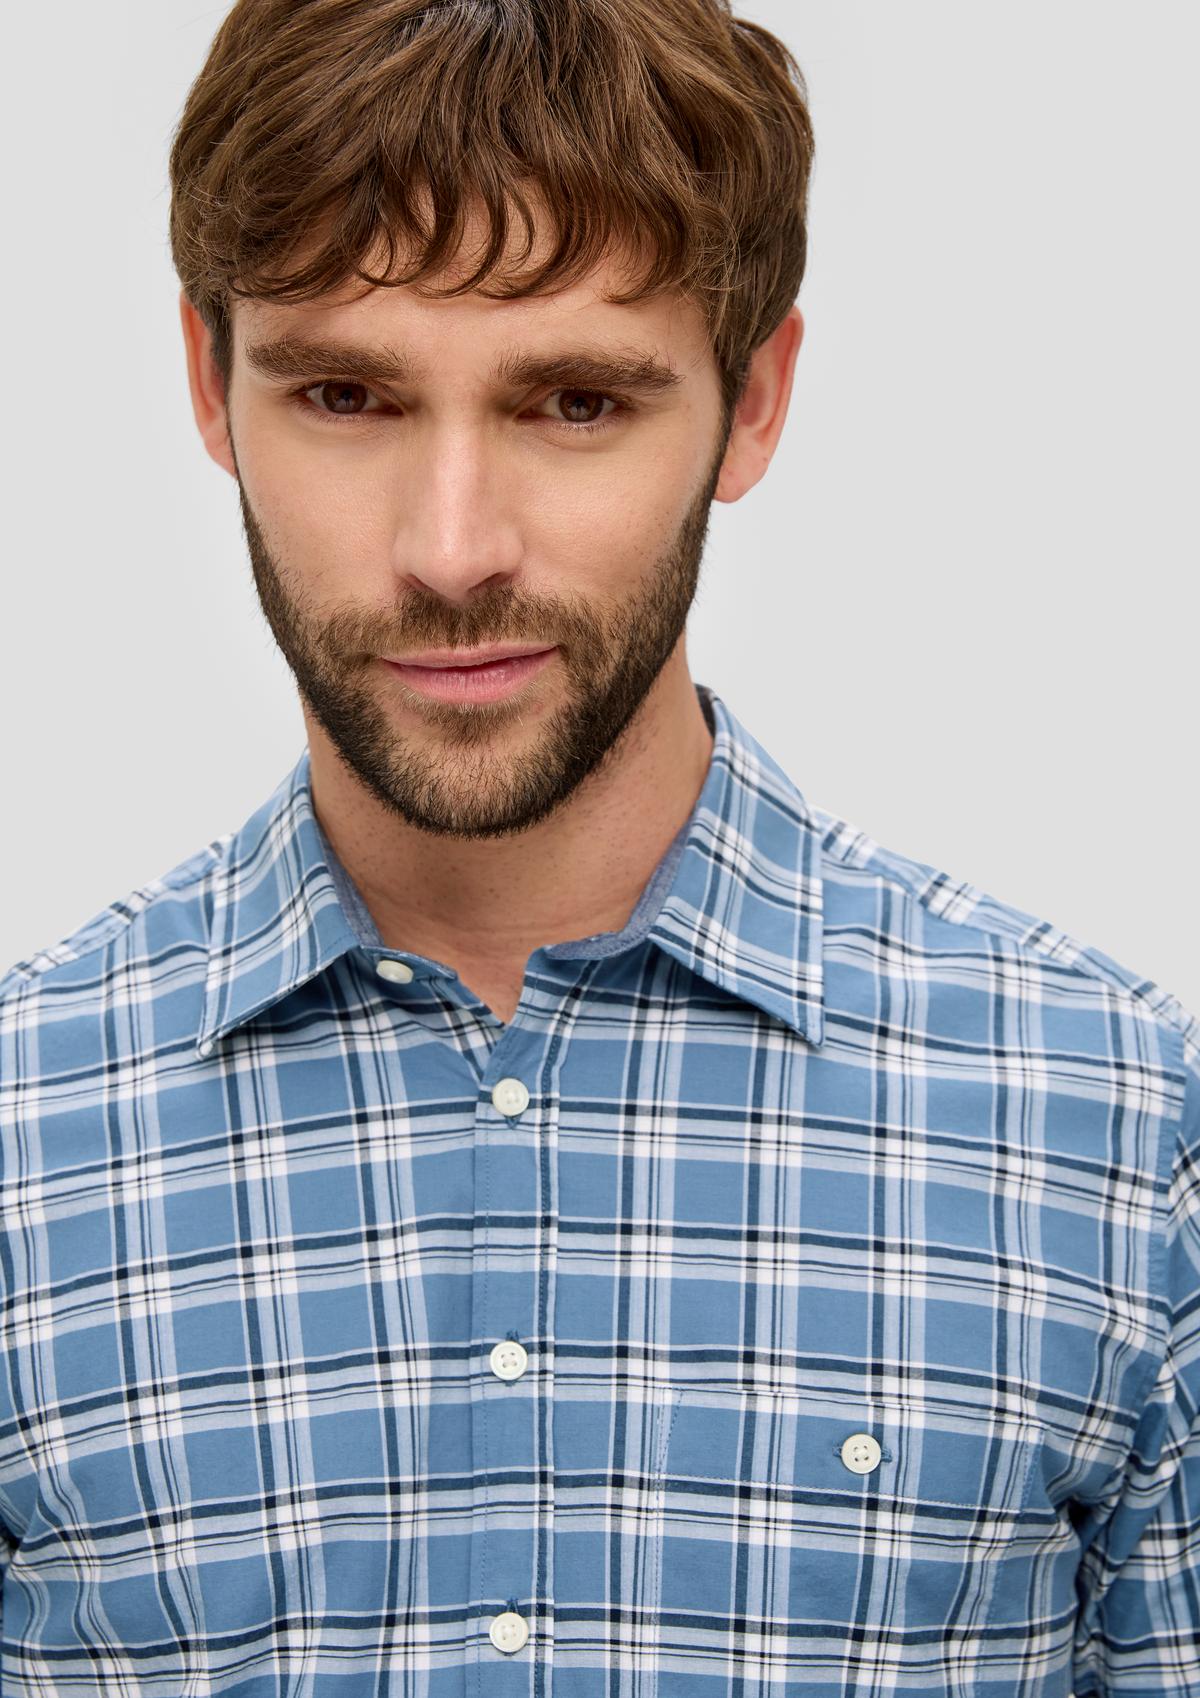 s.Oliver Short sleeve top with a check pattern